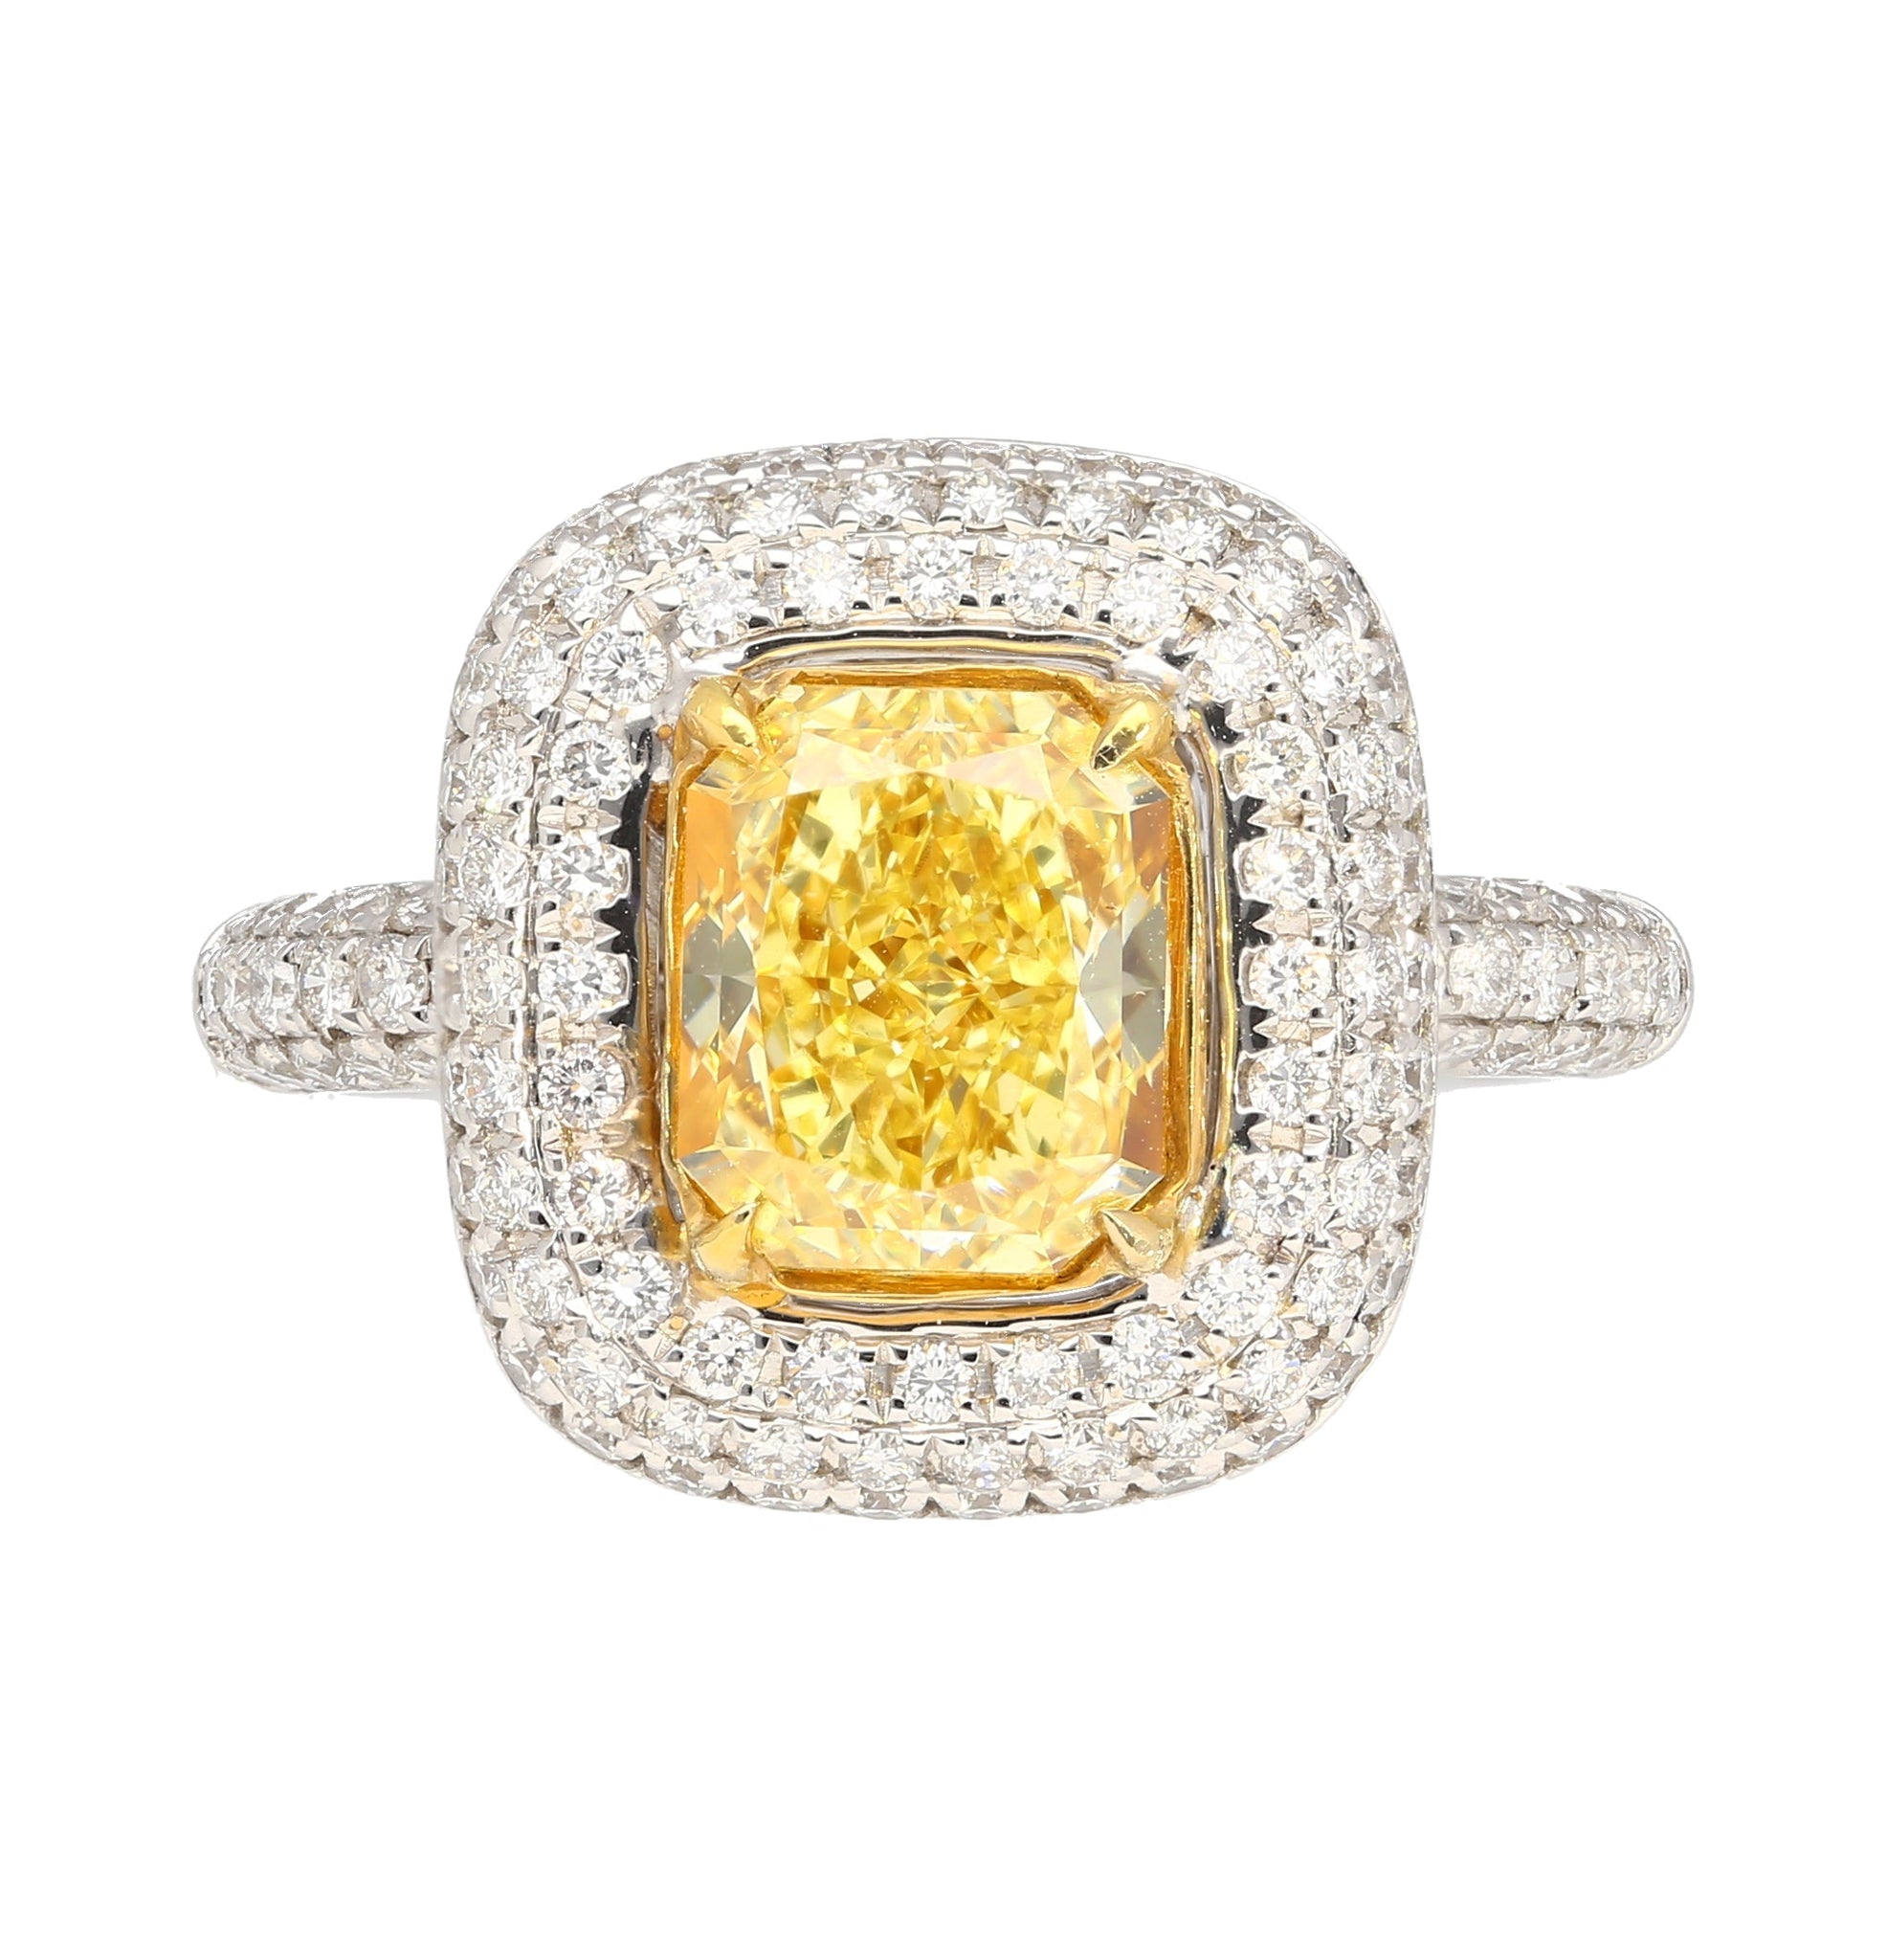 GIA Certified 2.35 Fancy Yellow Diamond Ring With 1.0 CTW Diamond Cluster in 18K White Gold